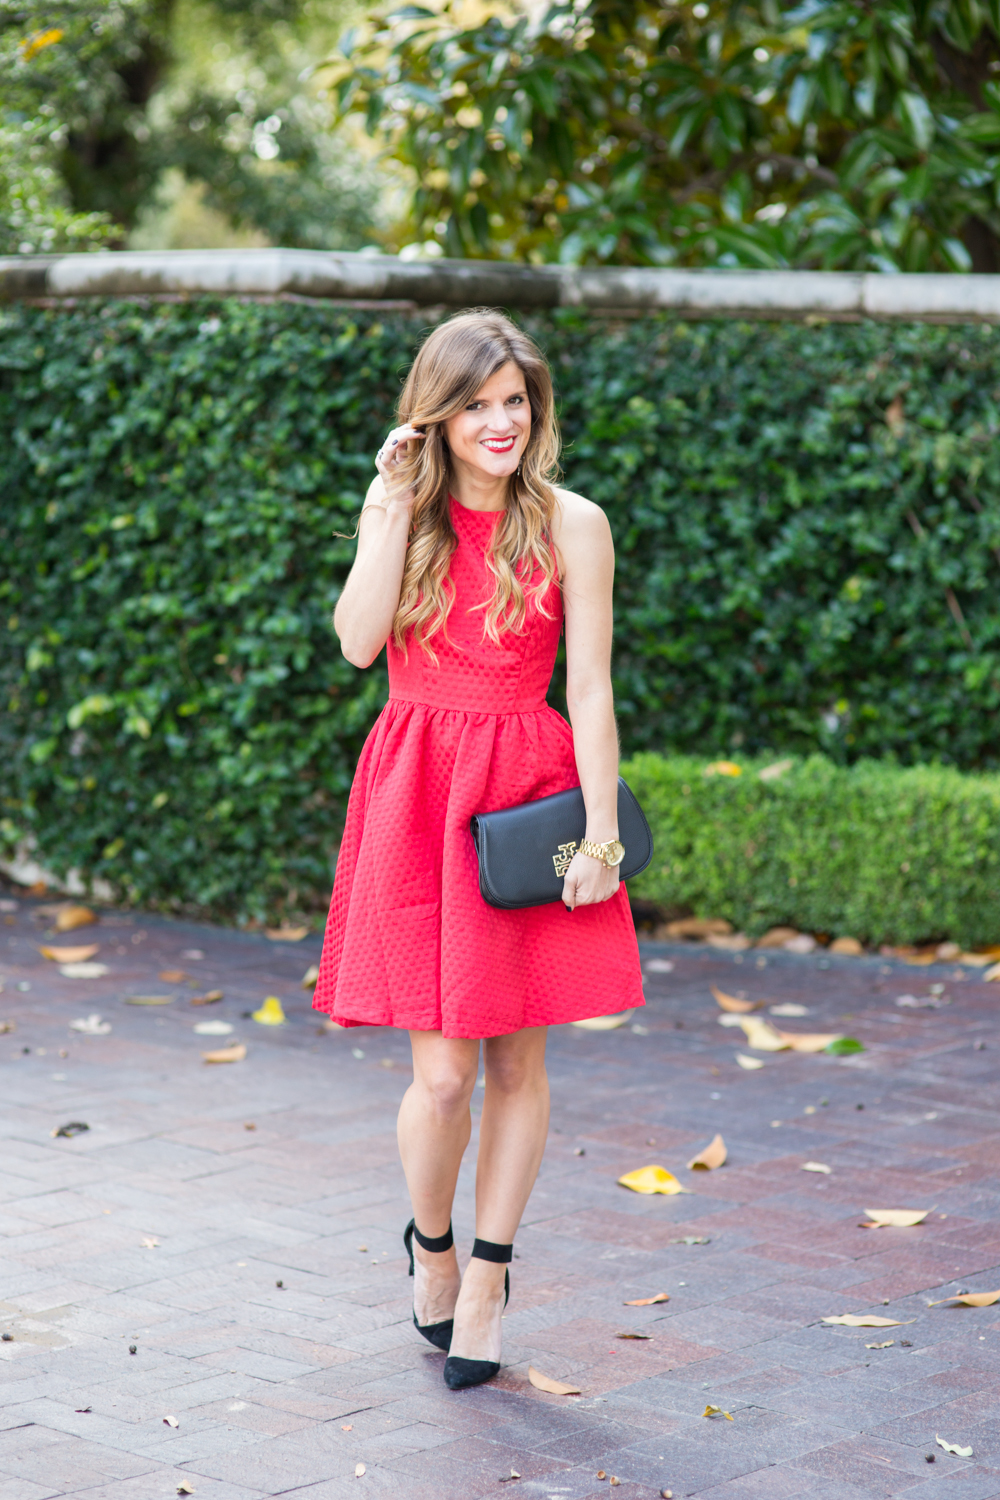 Little Red Dress - What to wear to a holiday party - festive holiday party attire